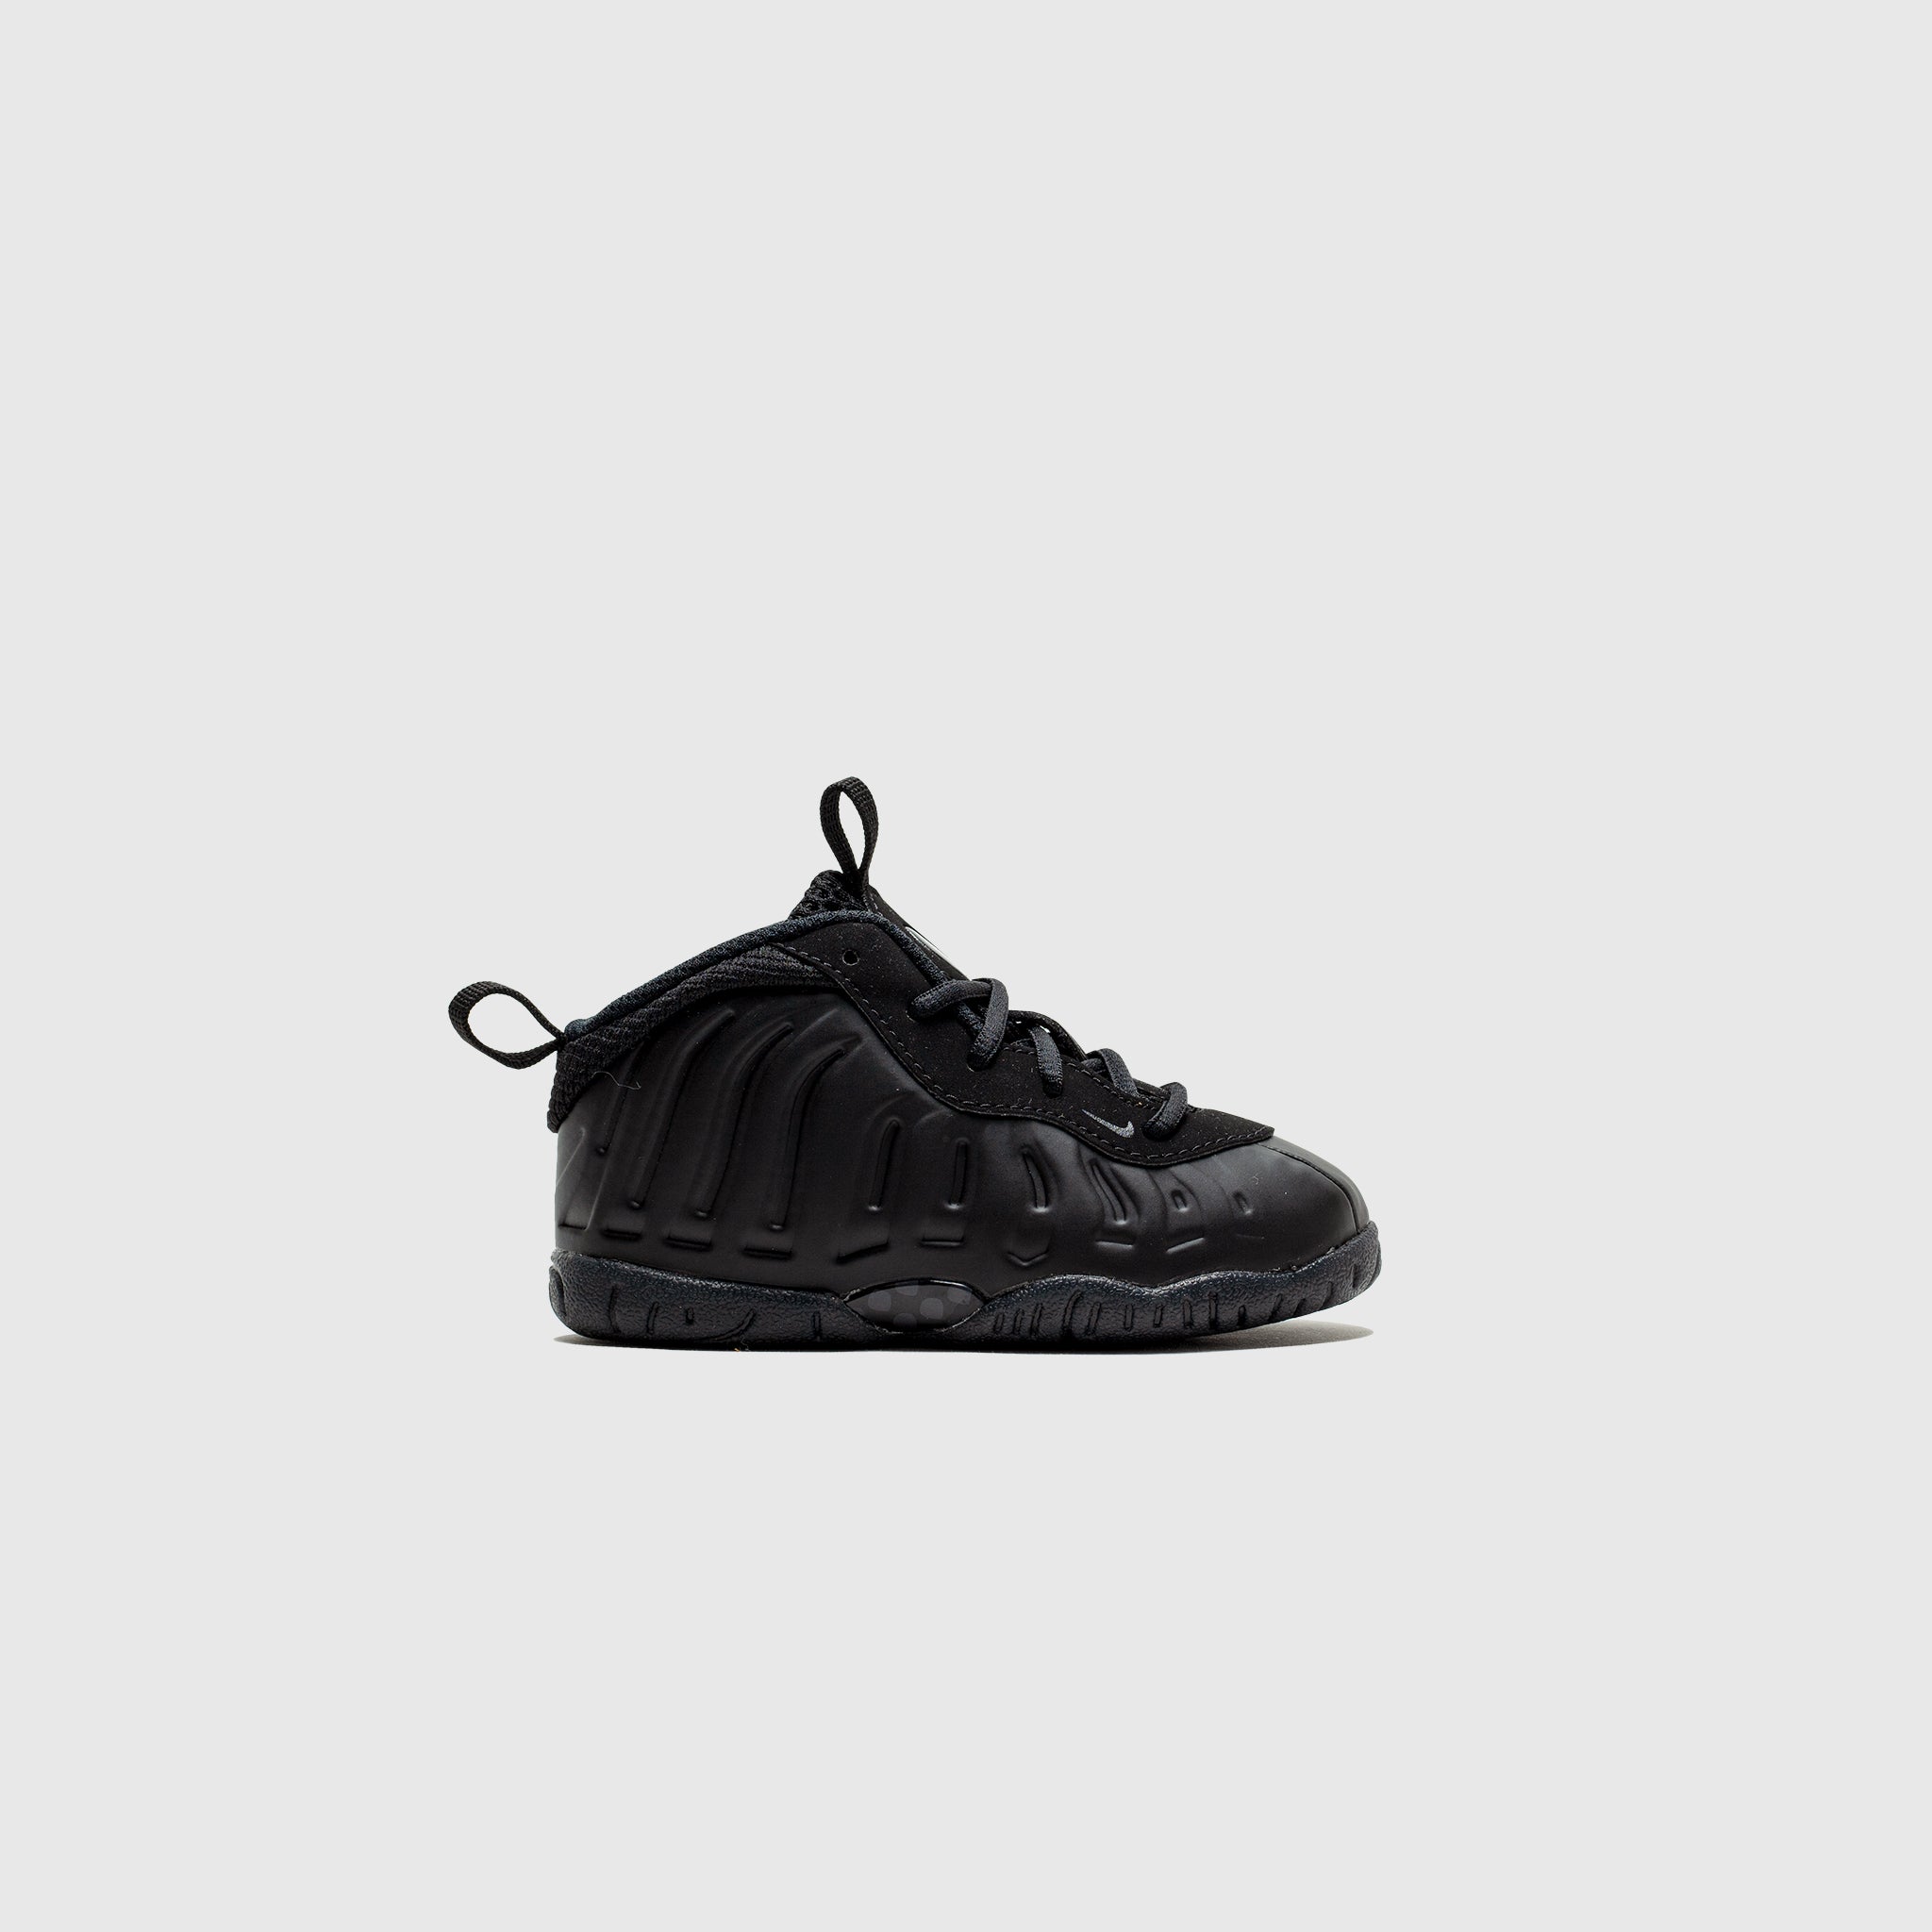 LITTLE POSITE ONE (TD) "ANTHRACITE"